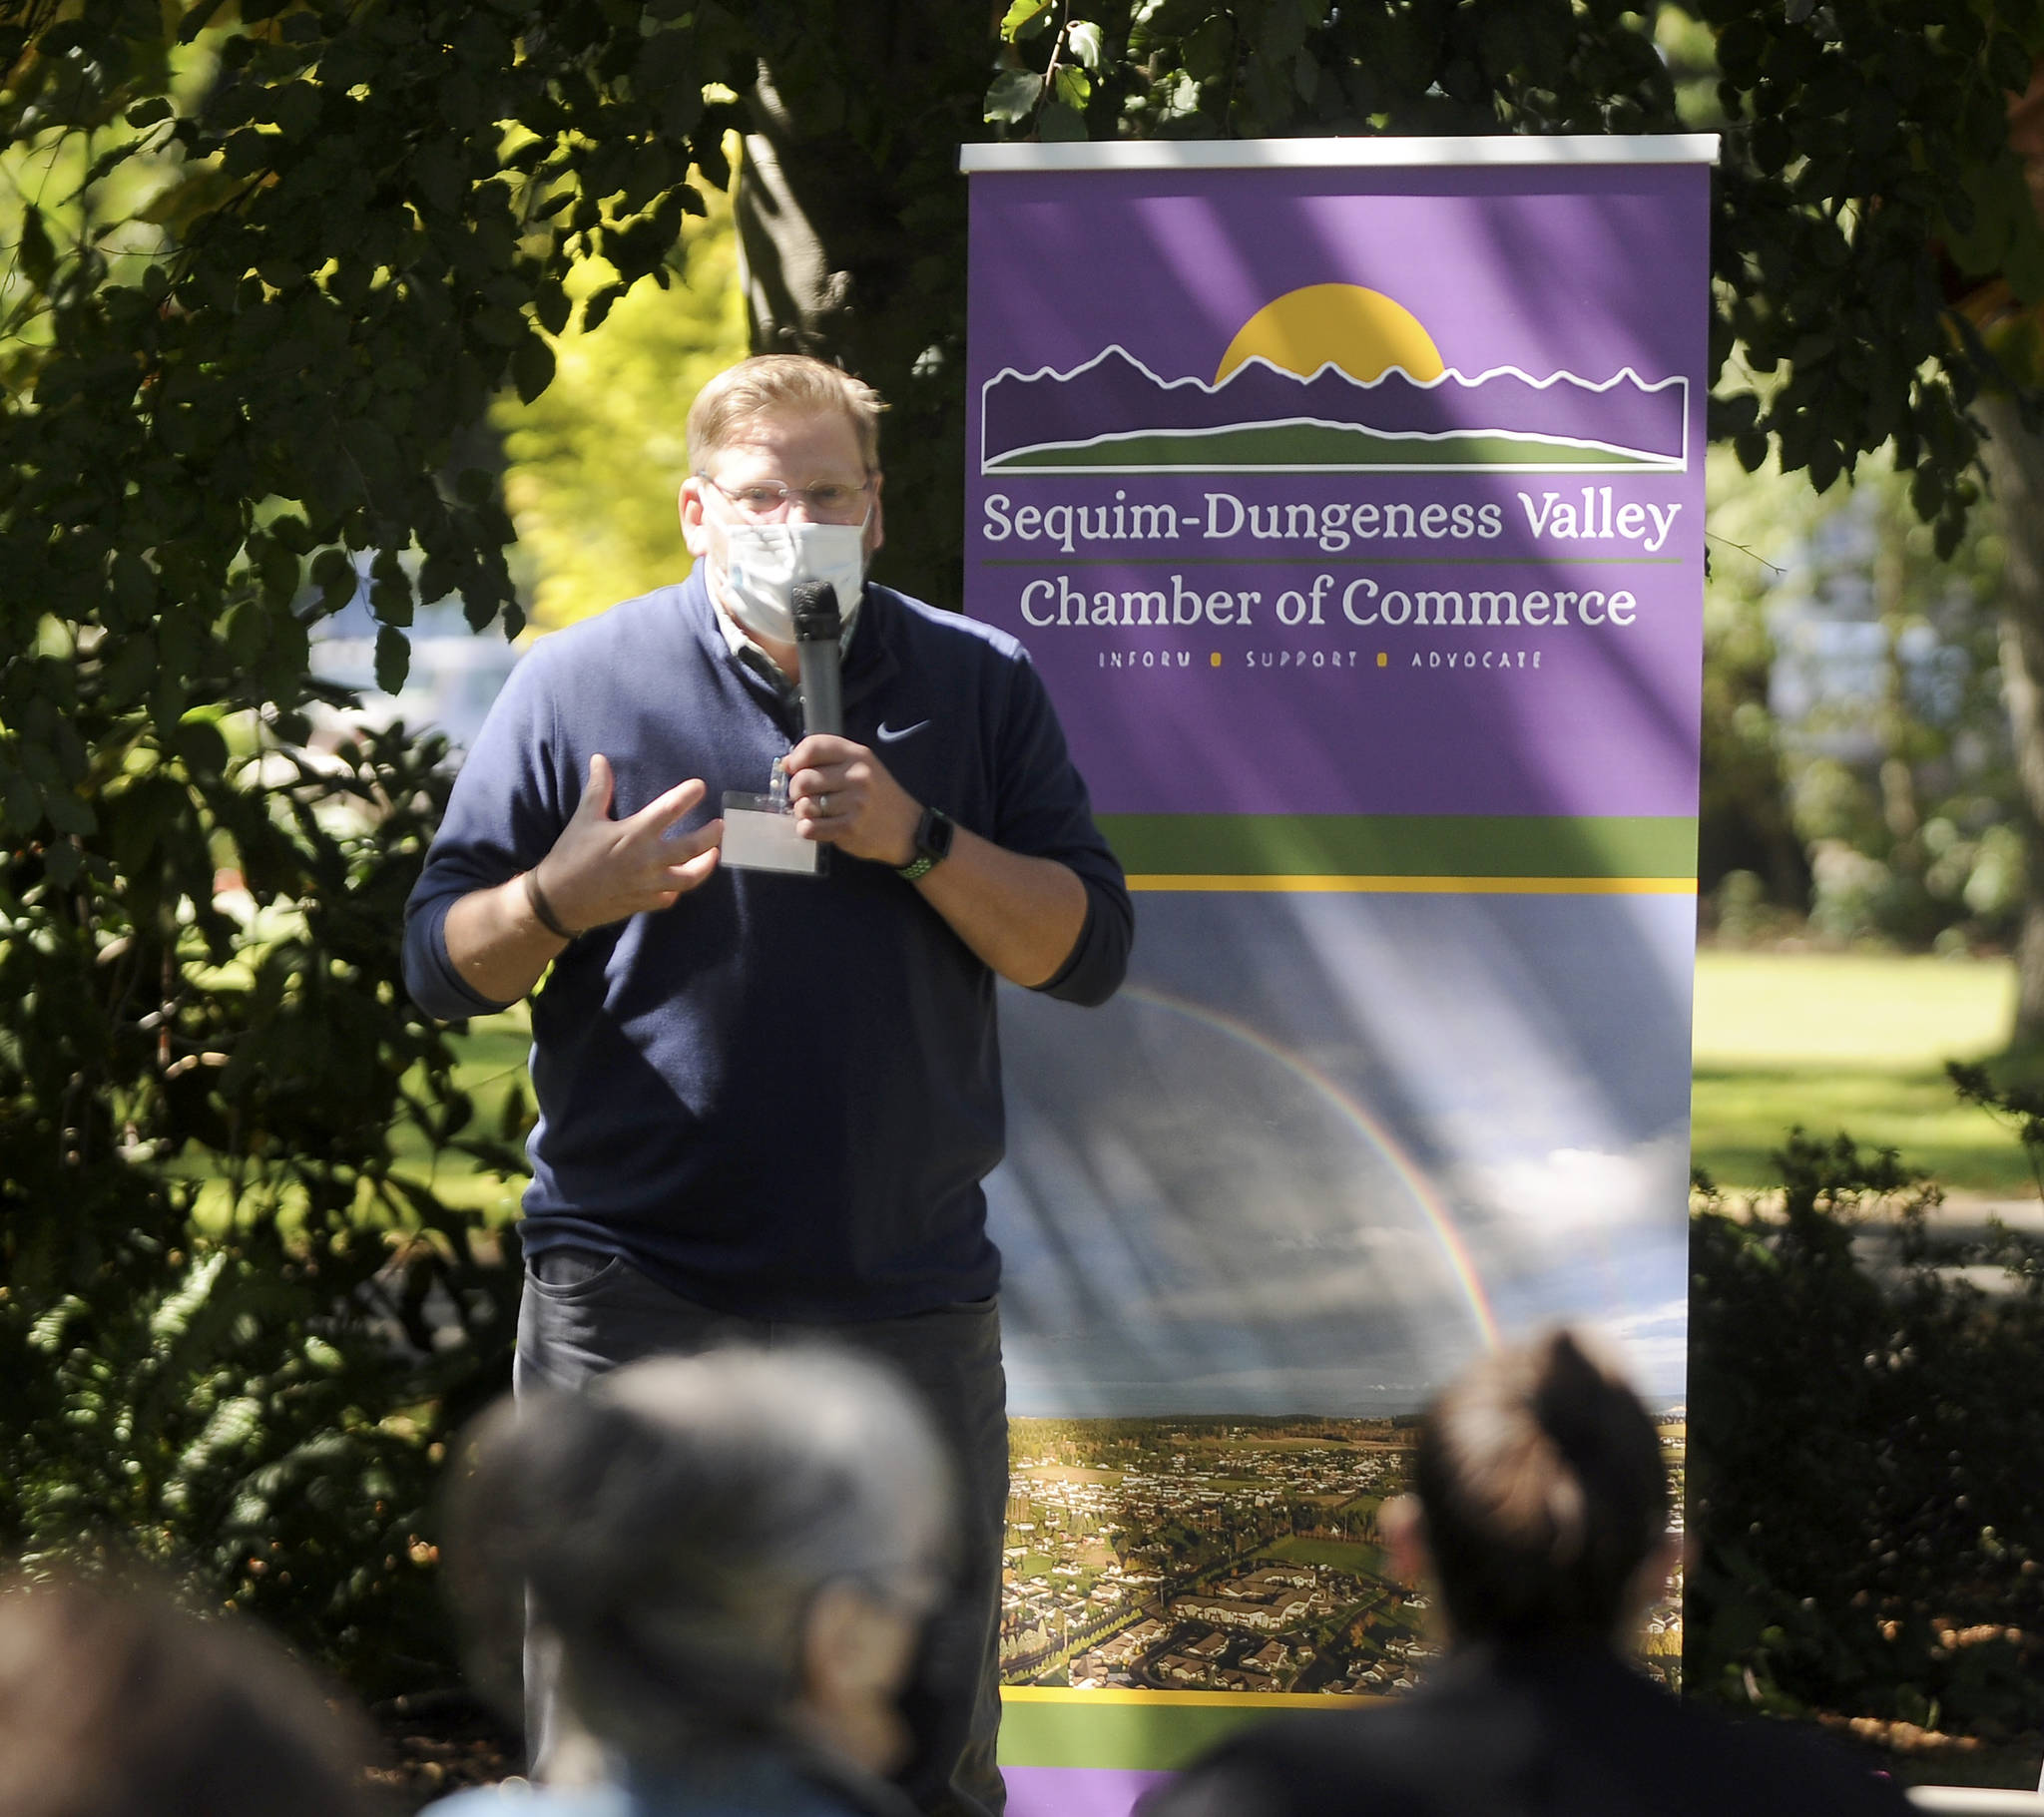 State Rep. Mike Chapman speaks at the Sequim-Dungeness Valley Chamber of Commerce’s annual picnic and Citizen of the Year presentation on Aug. 24, where the chamber honored essential workers with its 2020 award. Sequim Gazette photo by Michael Dashiell
State Rep. Mike Chapman speaks at the Sequim-Dungeness Valley Chamber of Commerce’s annual picnic and Citizen of the Year presentation on Aug. 24, where the chamber honored essential workers with its 2020 award. Sequim Gazette photo by Michael Dashiell